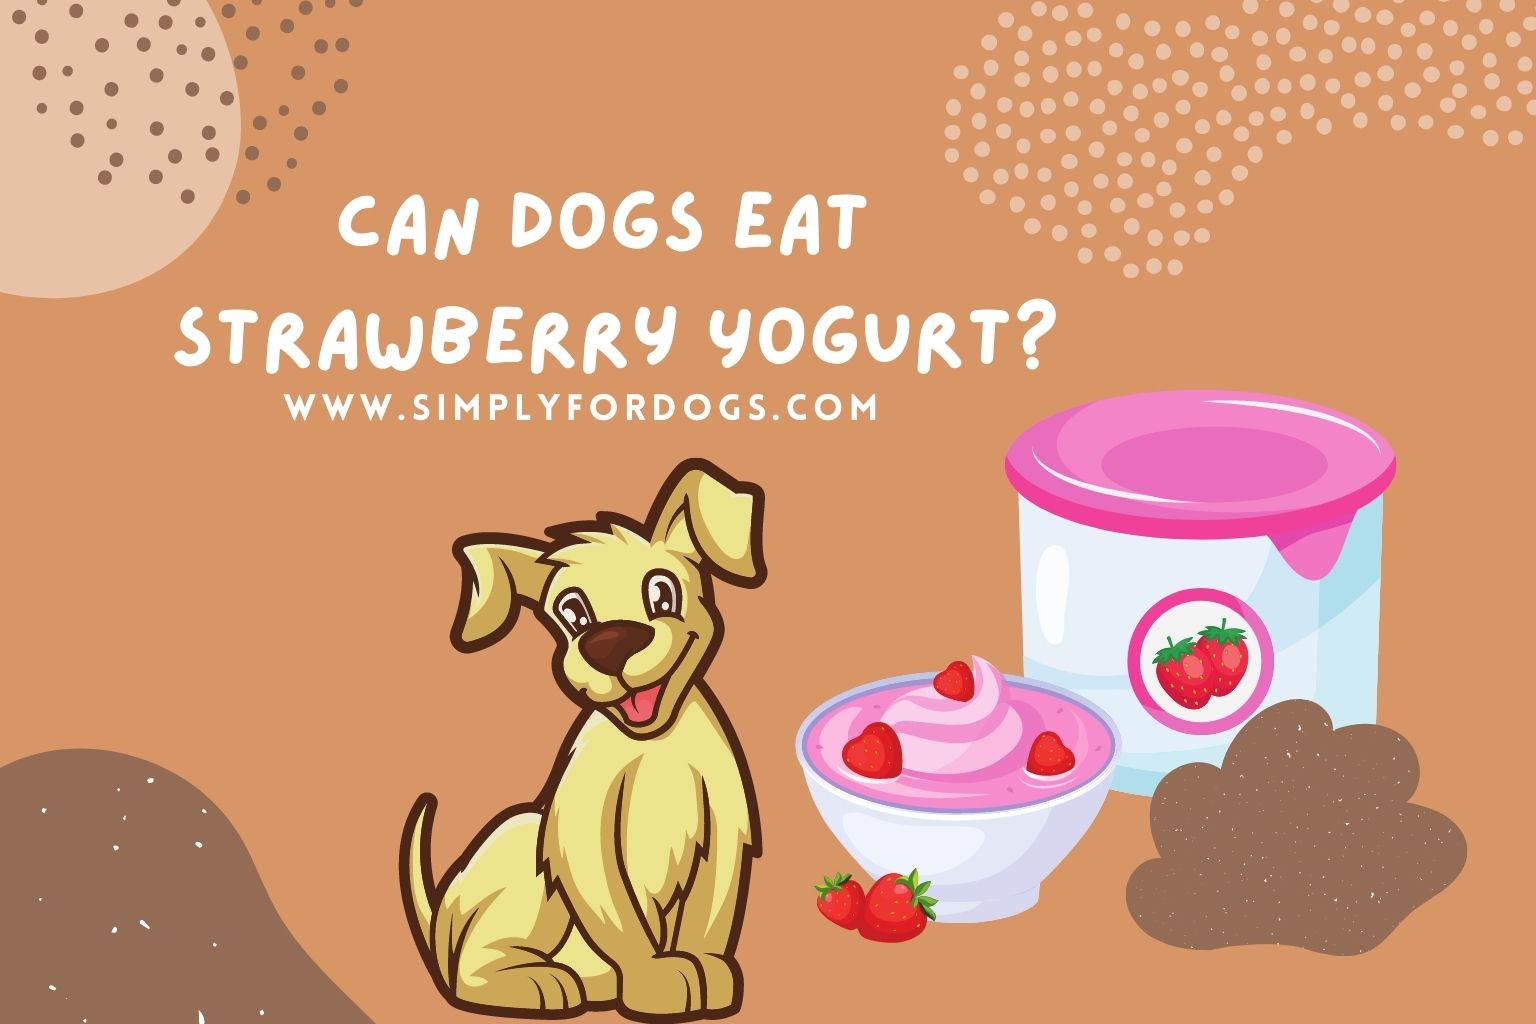 Can Dogs Eat Strawberry Yogurt - All You Need to Know